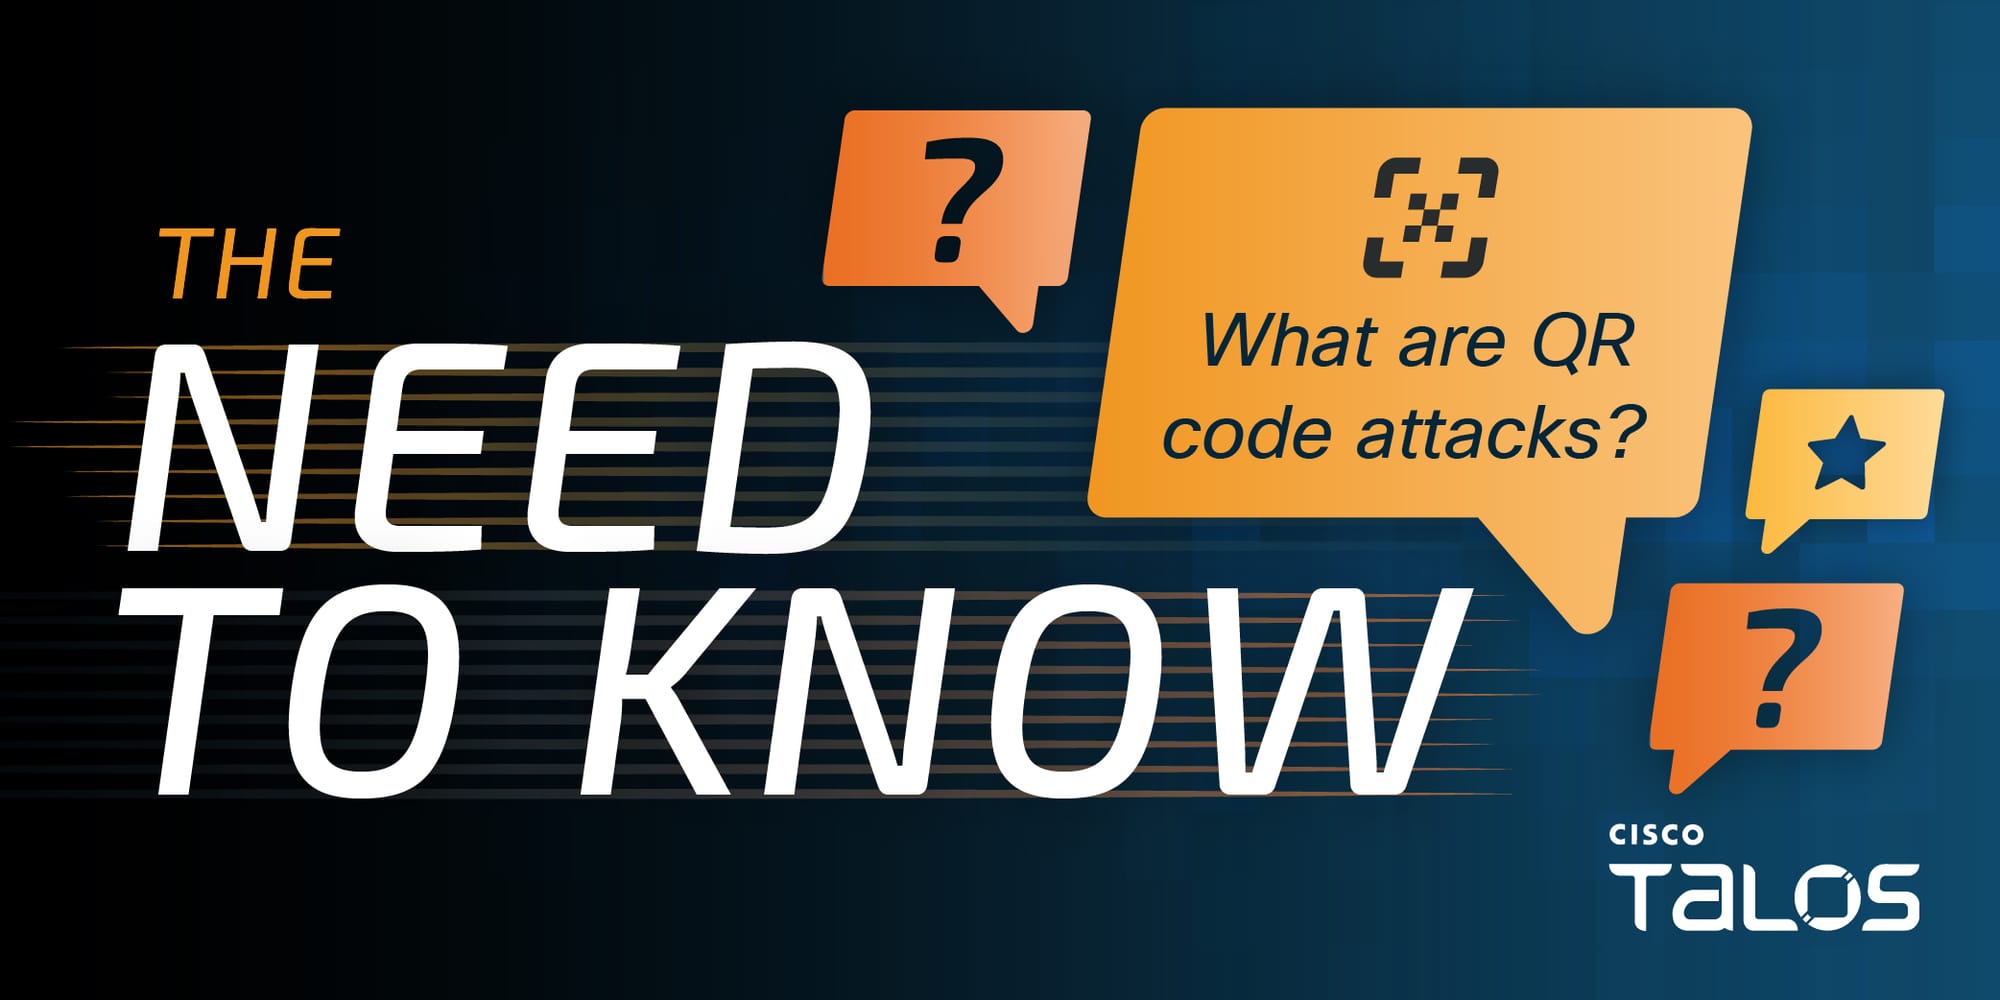 How are attackers using QR codes in phishing emails and lure documents?